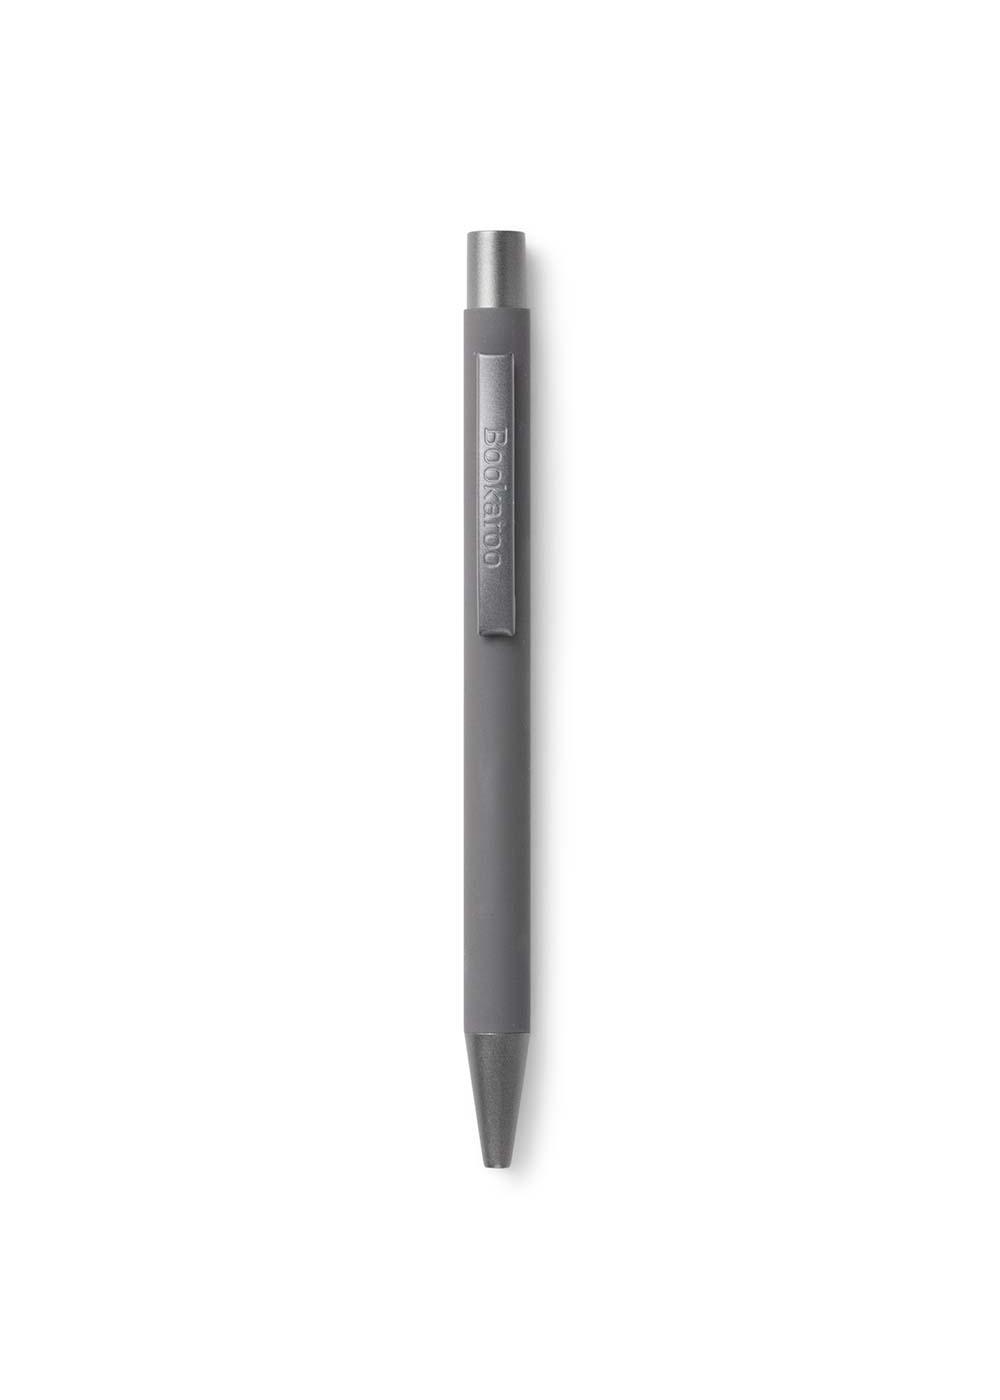 Bookaroo Charcoal Retractable Ball Point Pen - Black Ink; image 3 of 3